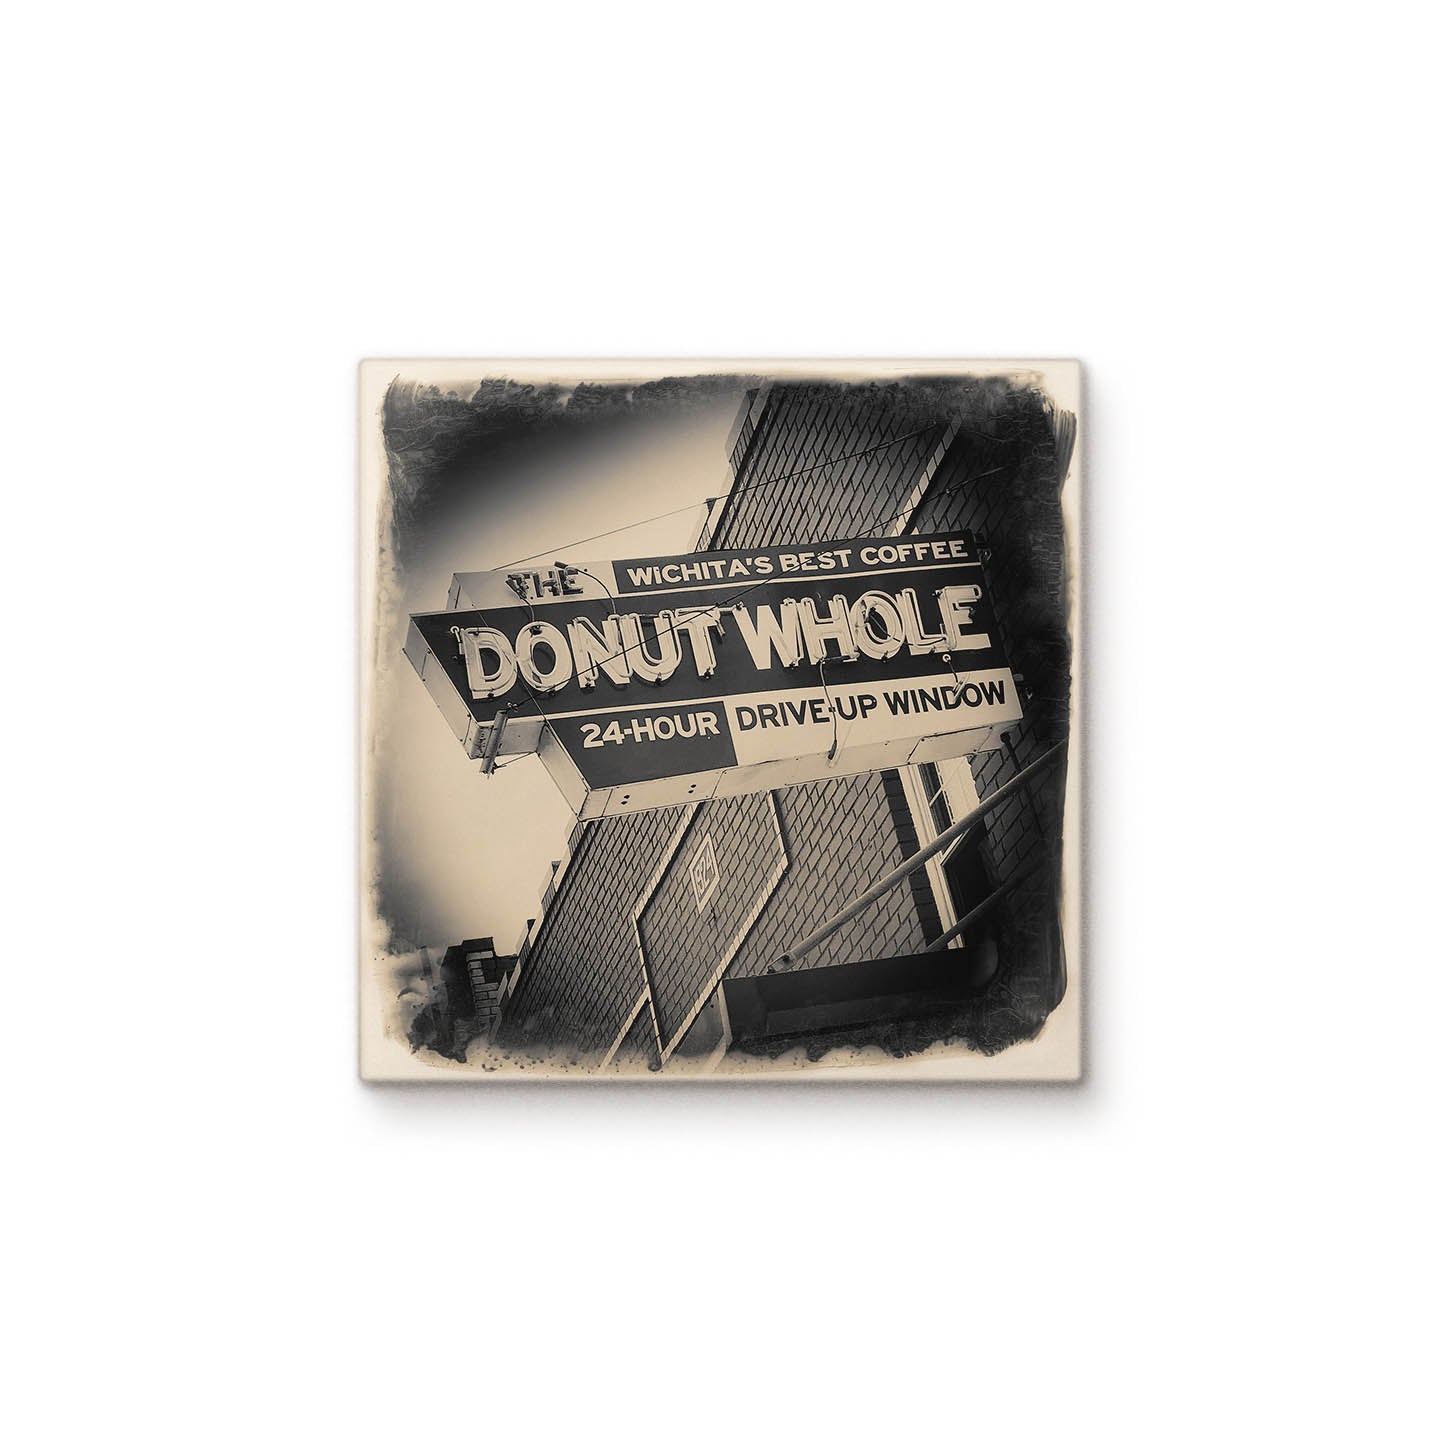 The Donut Whole